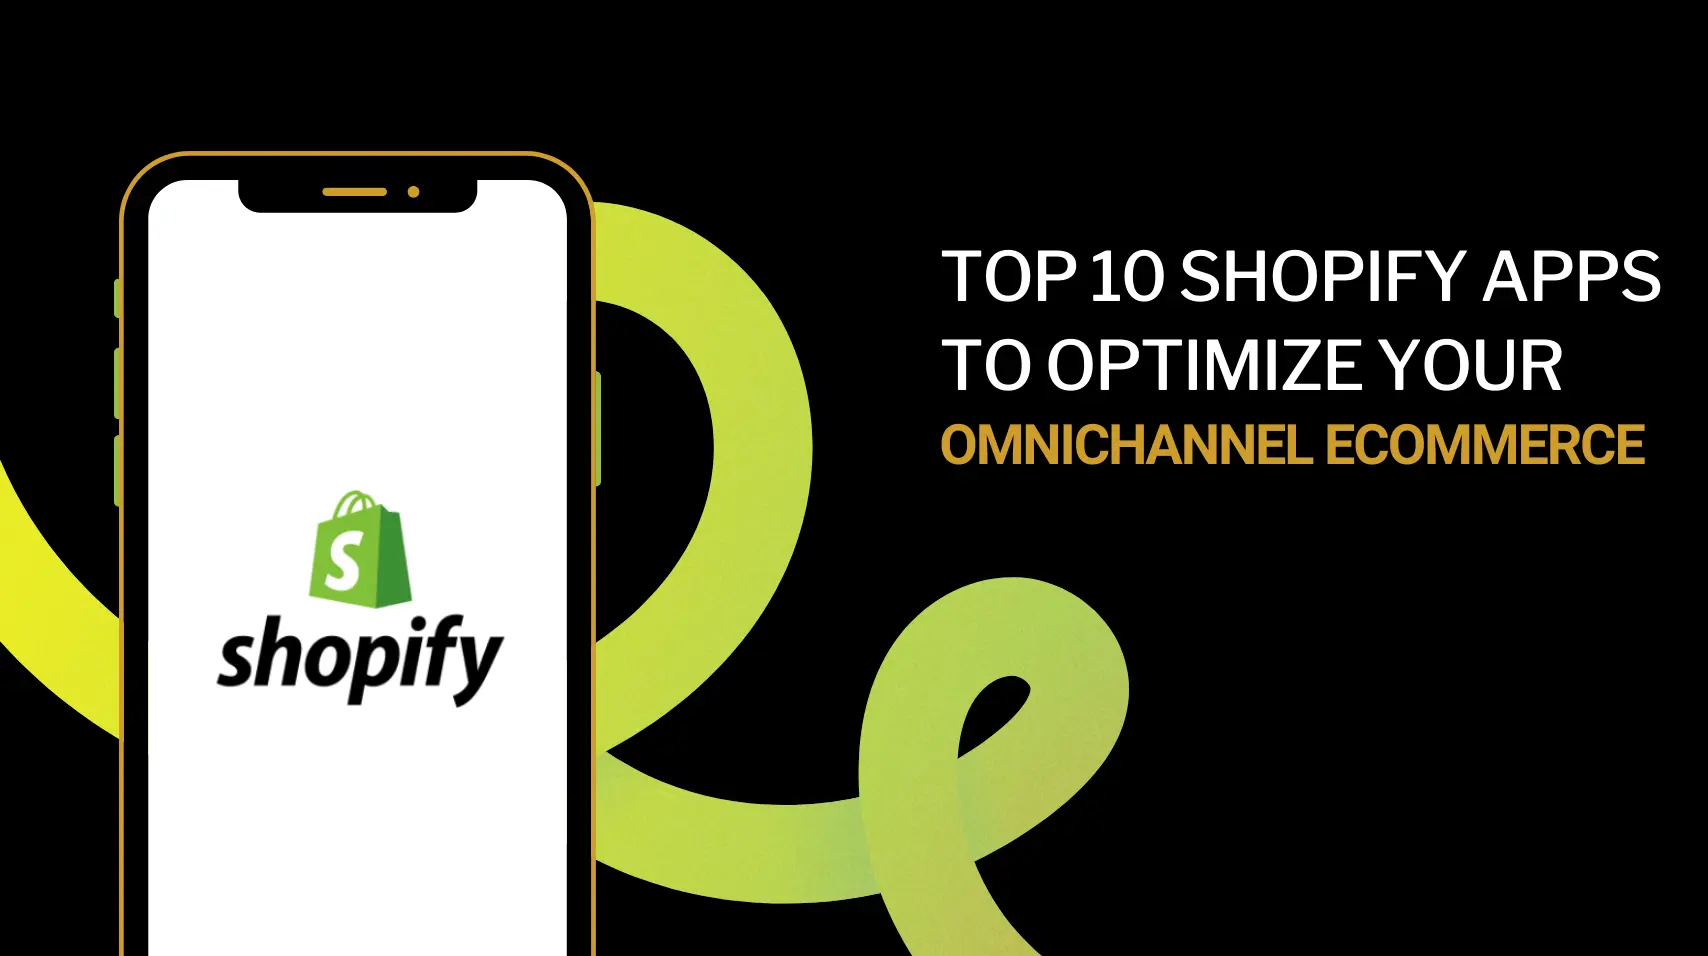 Top 10 Shopify Apps to Optimize Your Omnichannel eCommerce